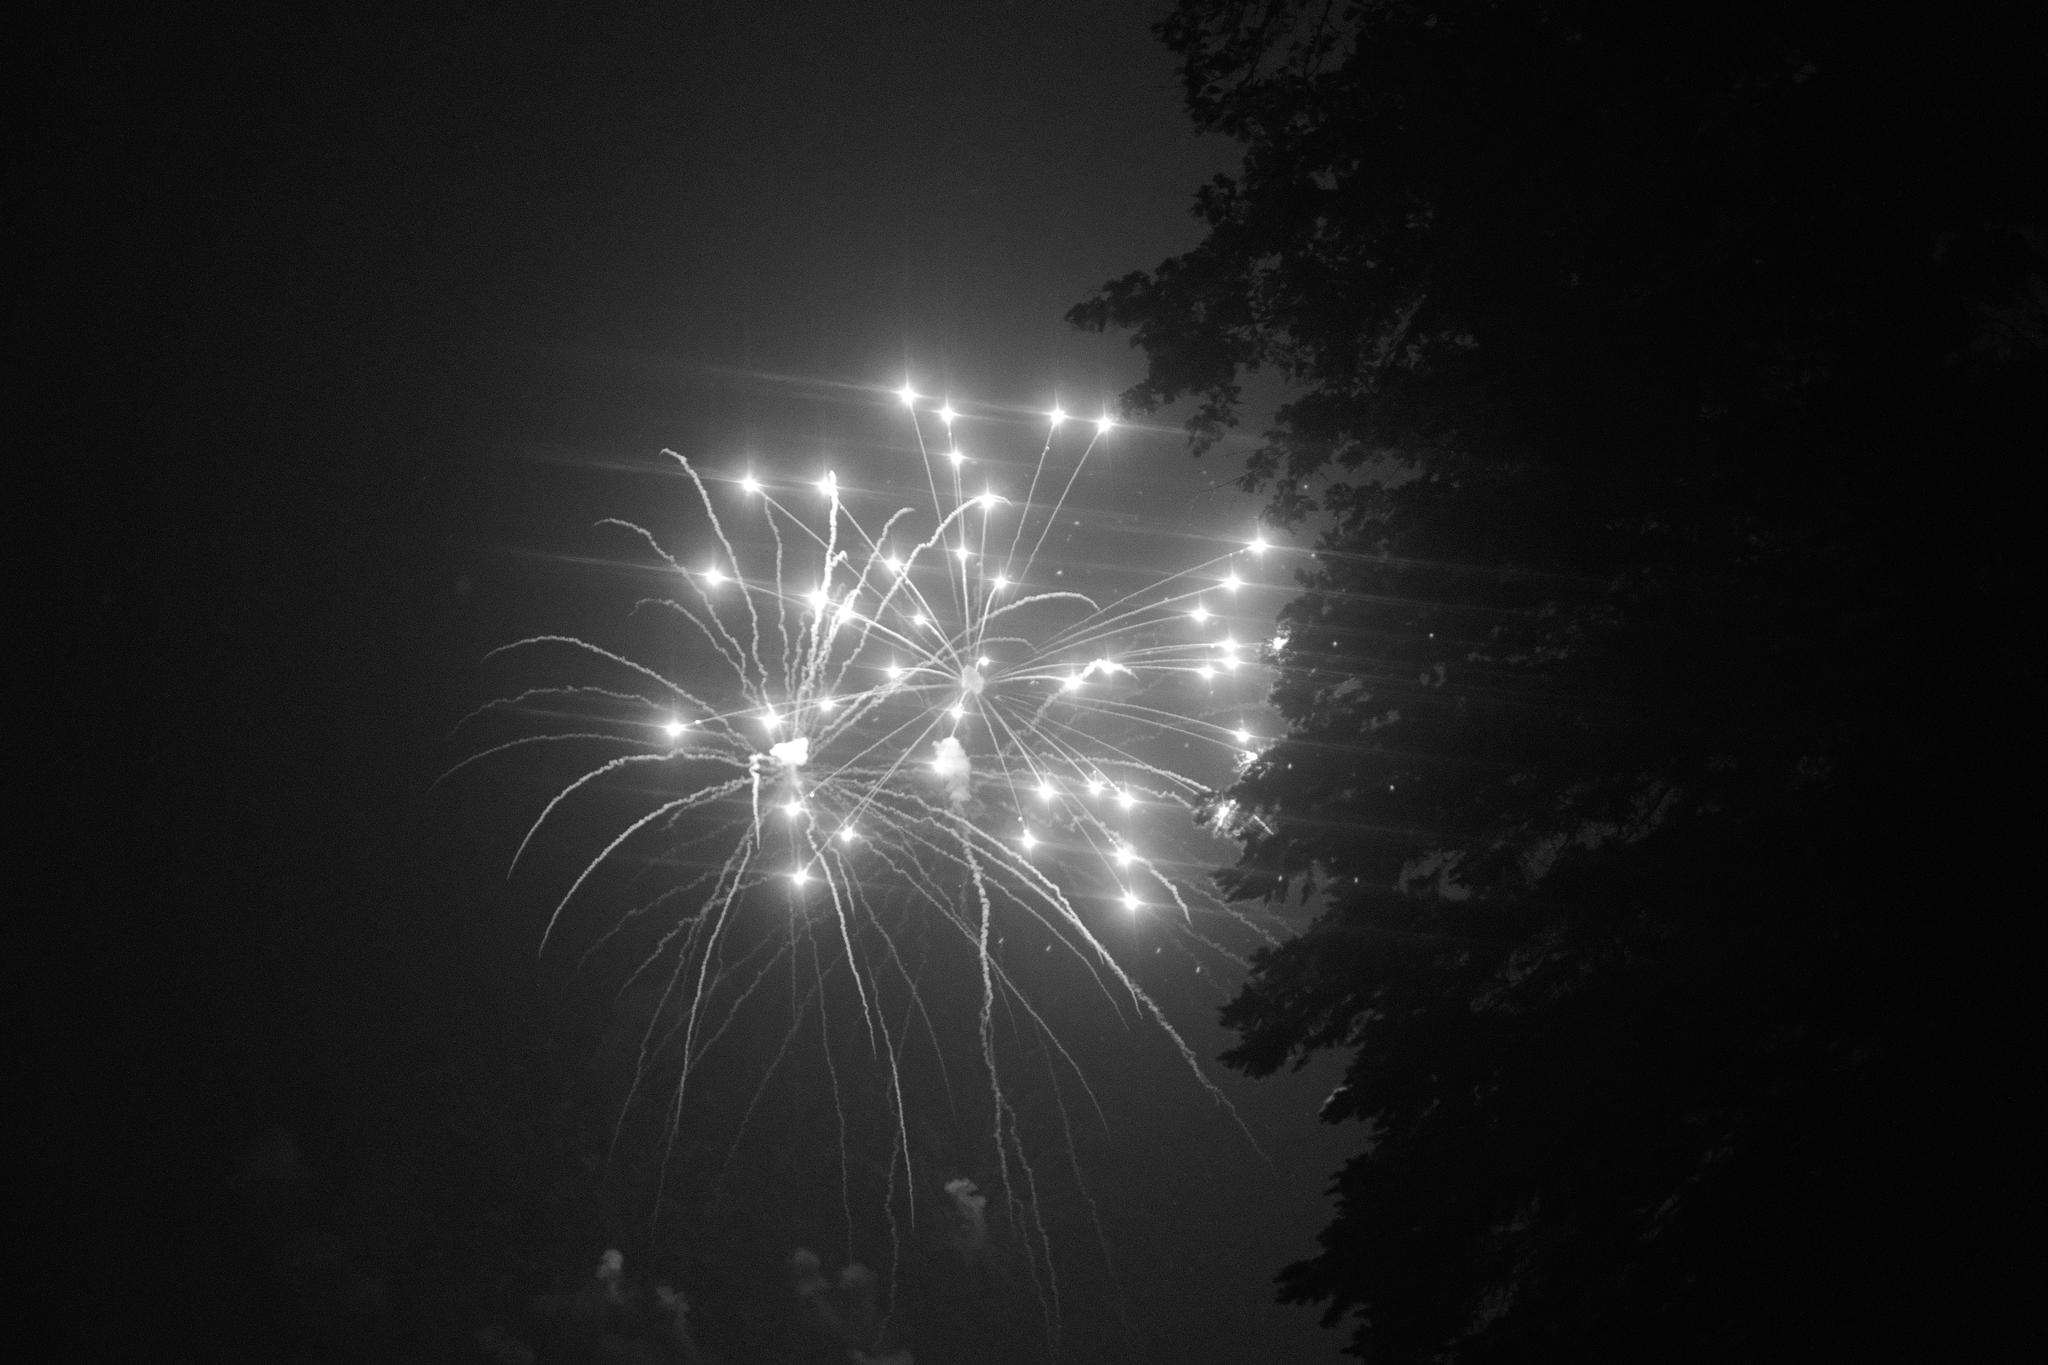 Fireworks exploding in the night sky with tree silhouettes on the right side